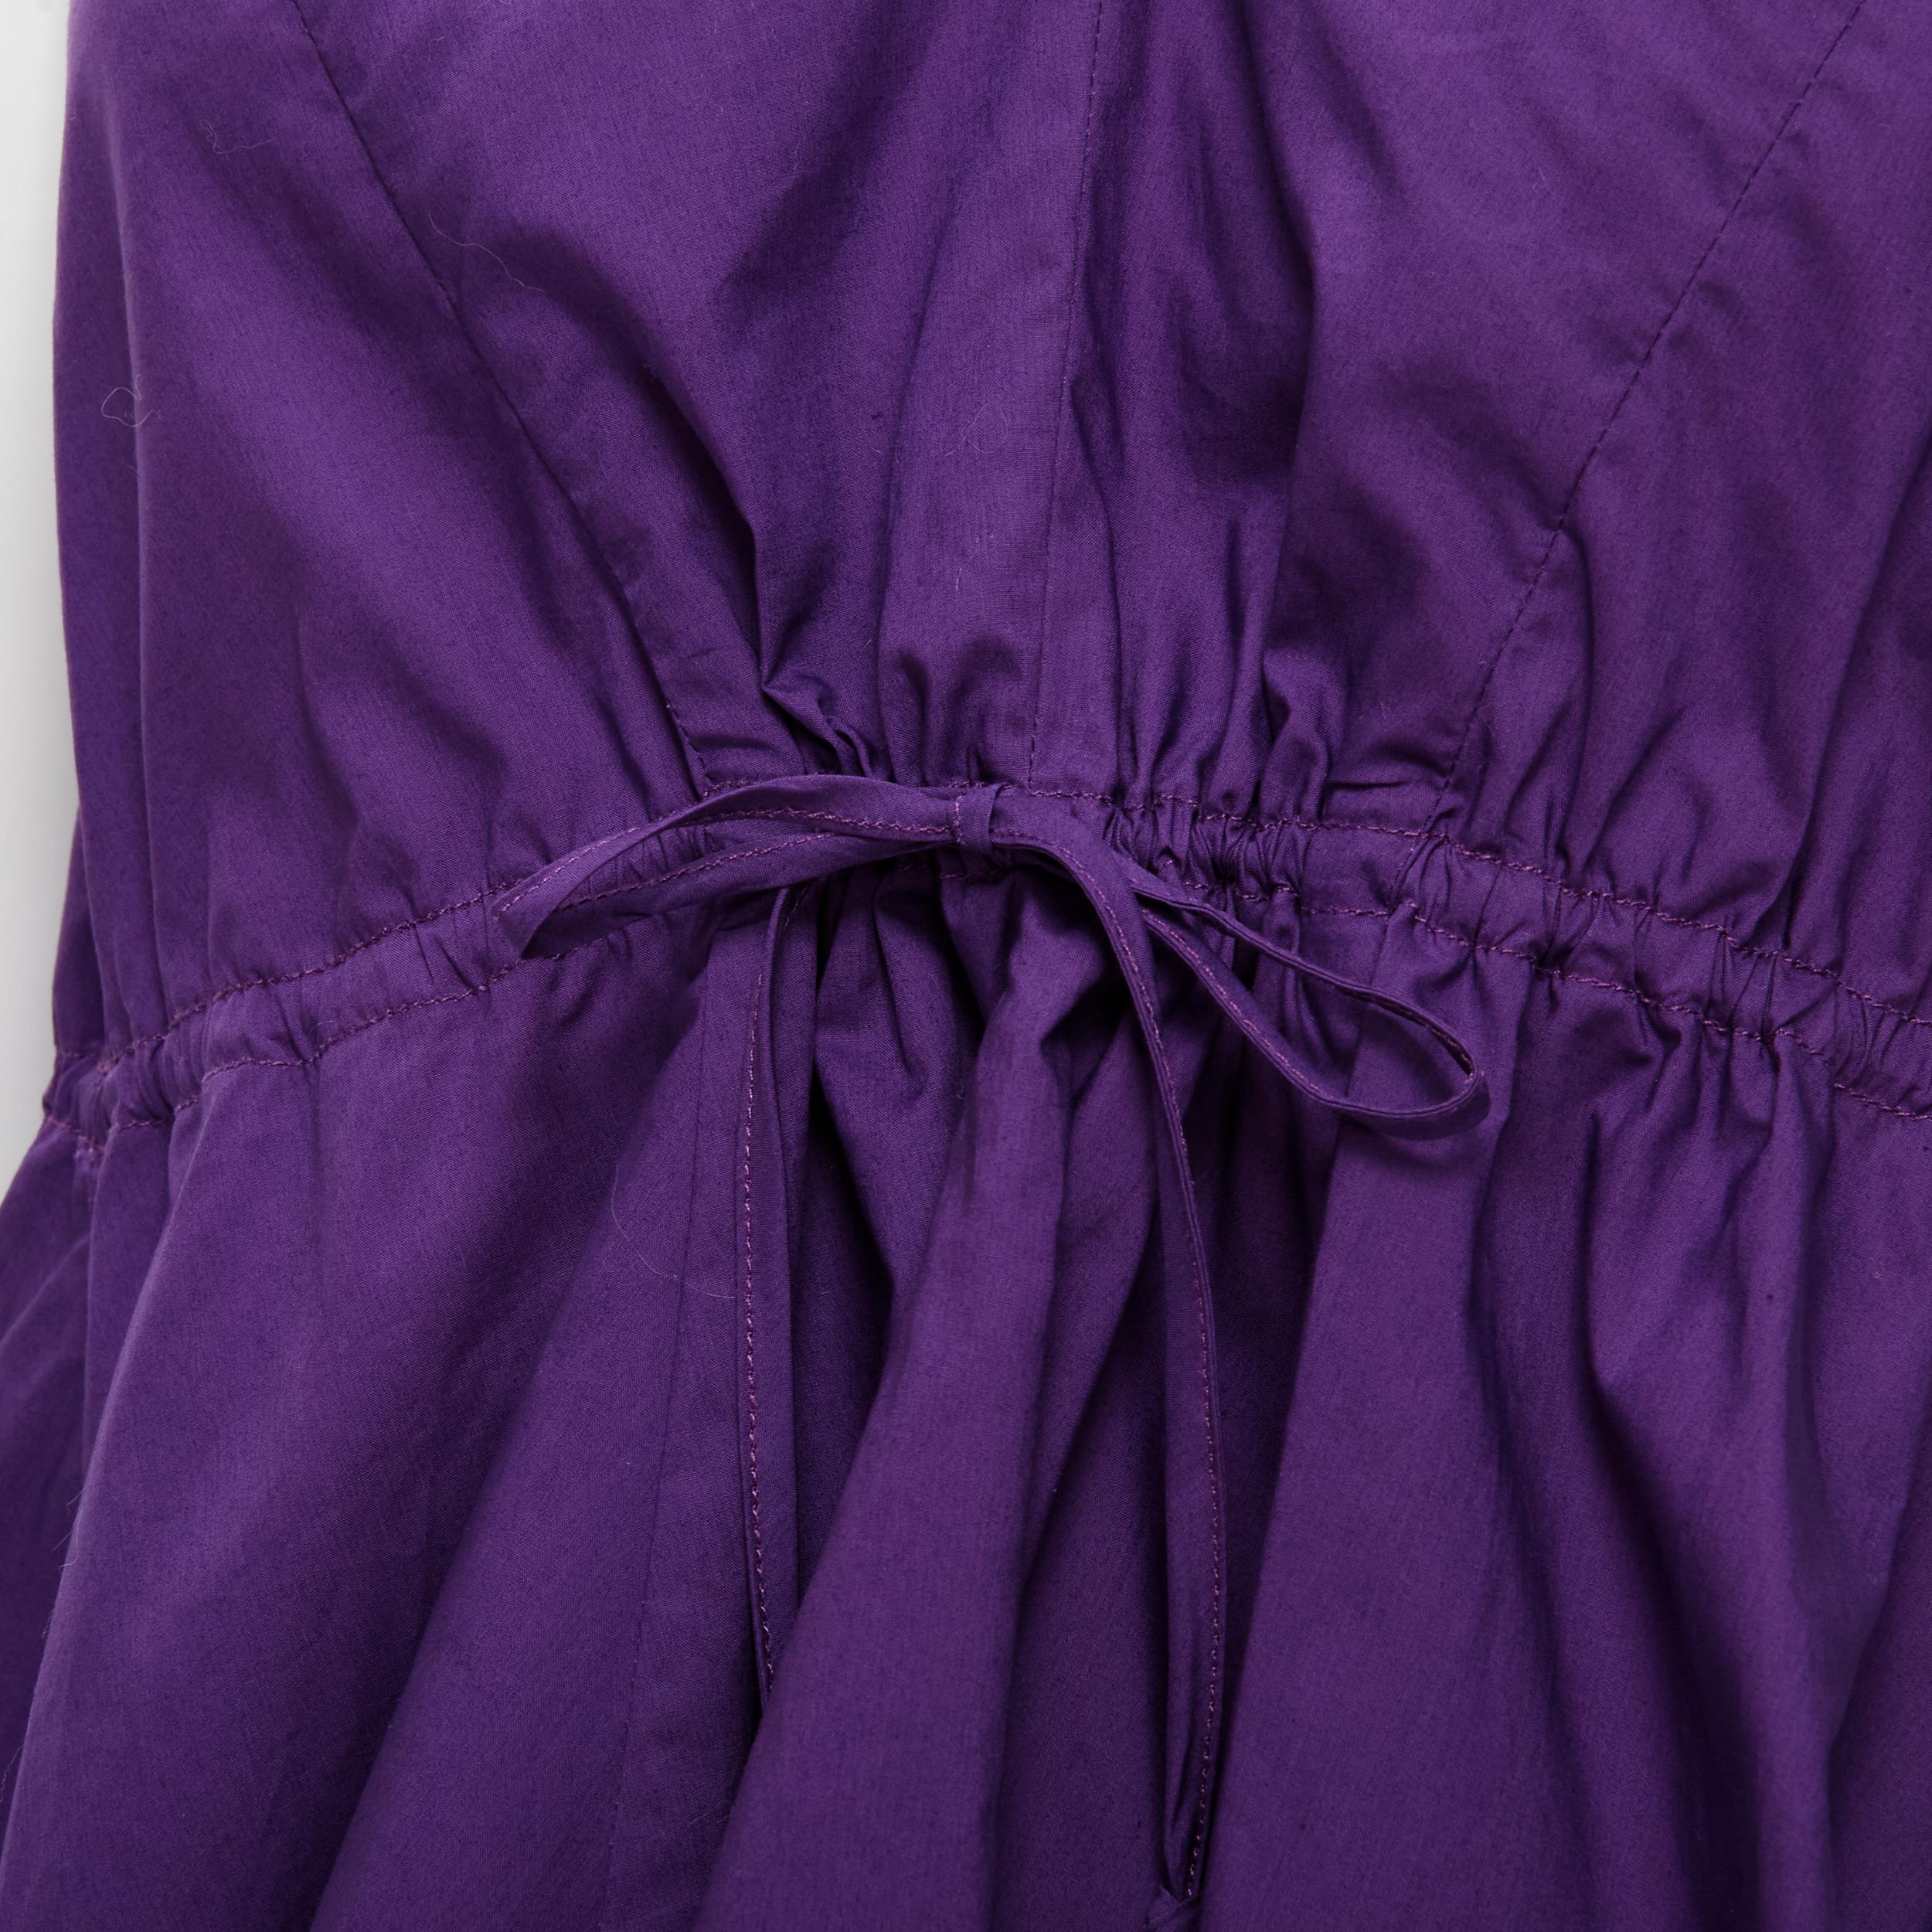 MARNI purple cotton V-neck drawstring peplum high low top IT40 S 
Reference: CELG/A00130 
Brand: Marni 
Material: Cotton 
Color: Purple 
Pattern: Solid 
Closure: Drawstring 
Made in: Italy 

CONDITION: 
Condition: Excellent, this item was pre-owned